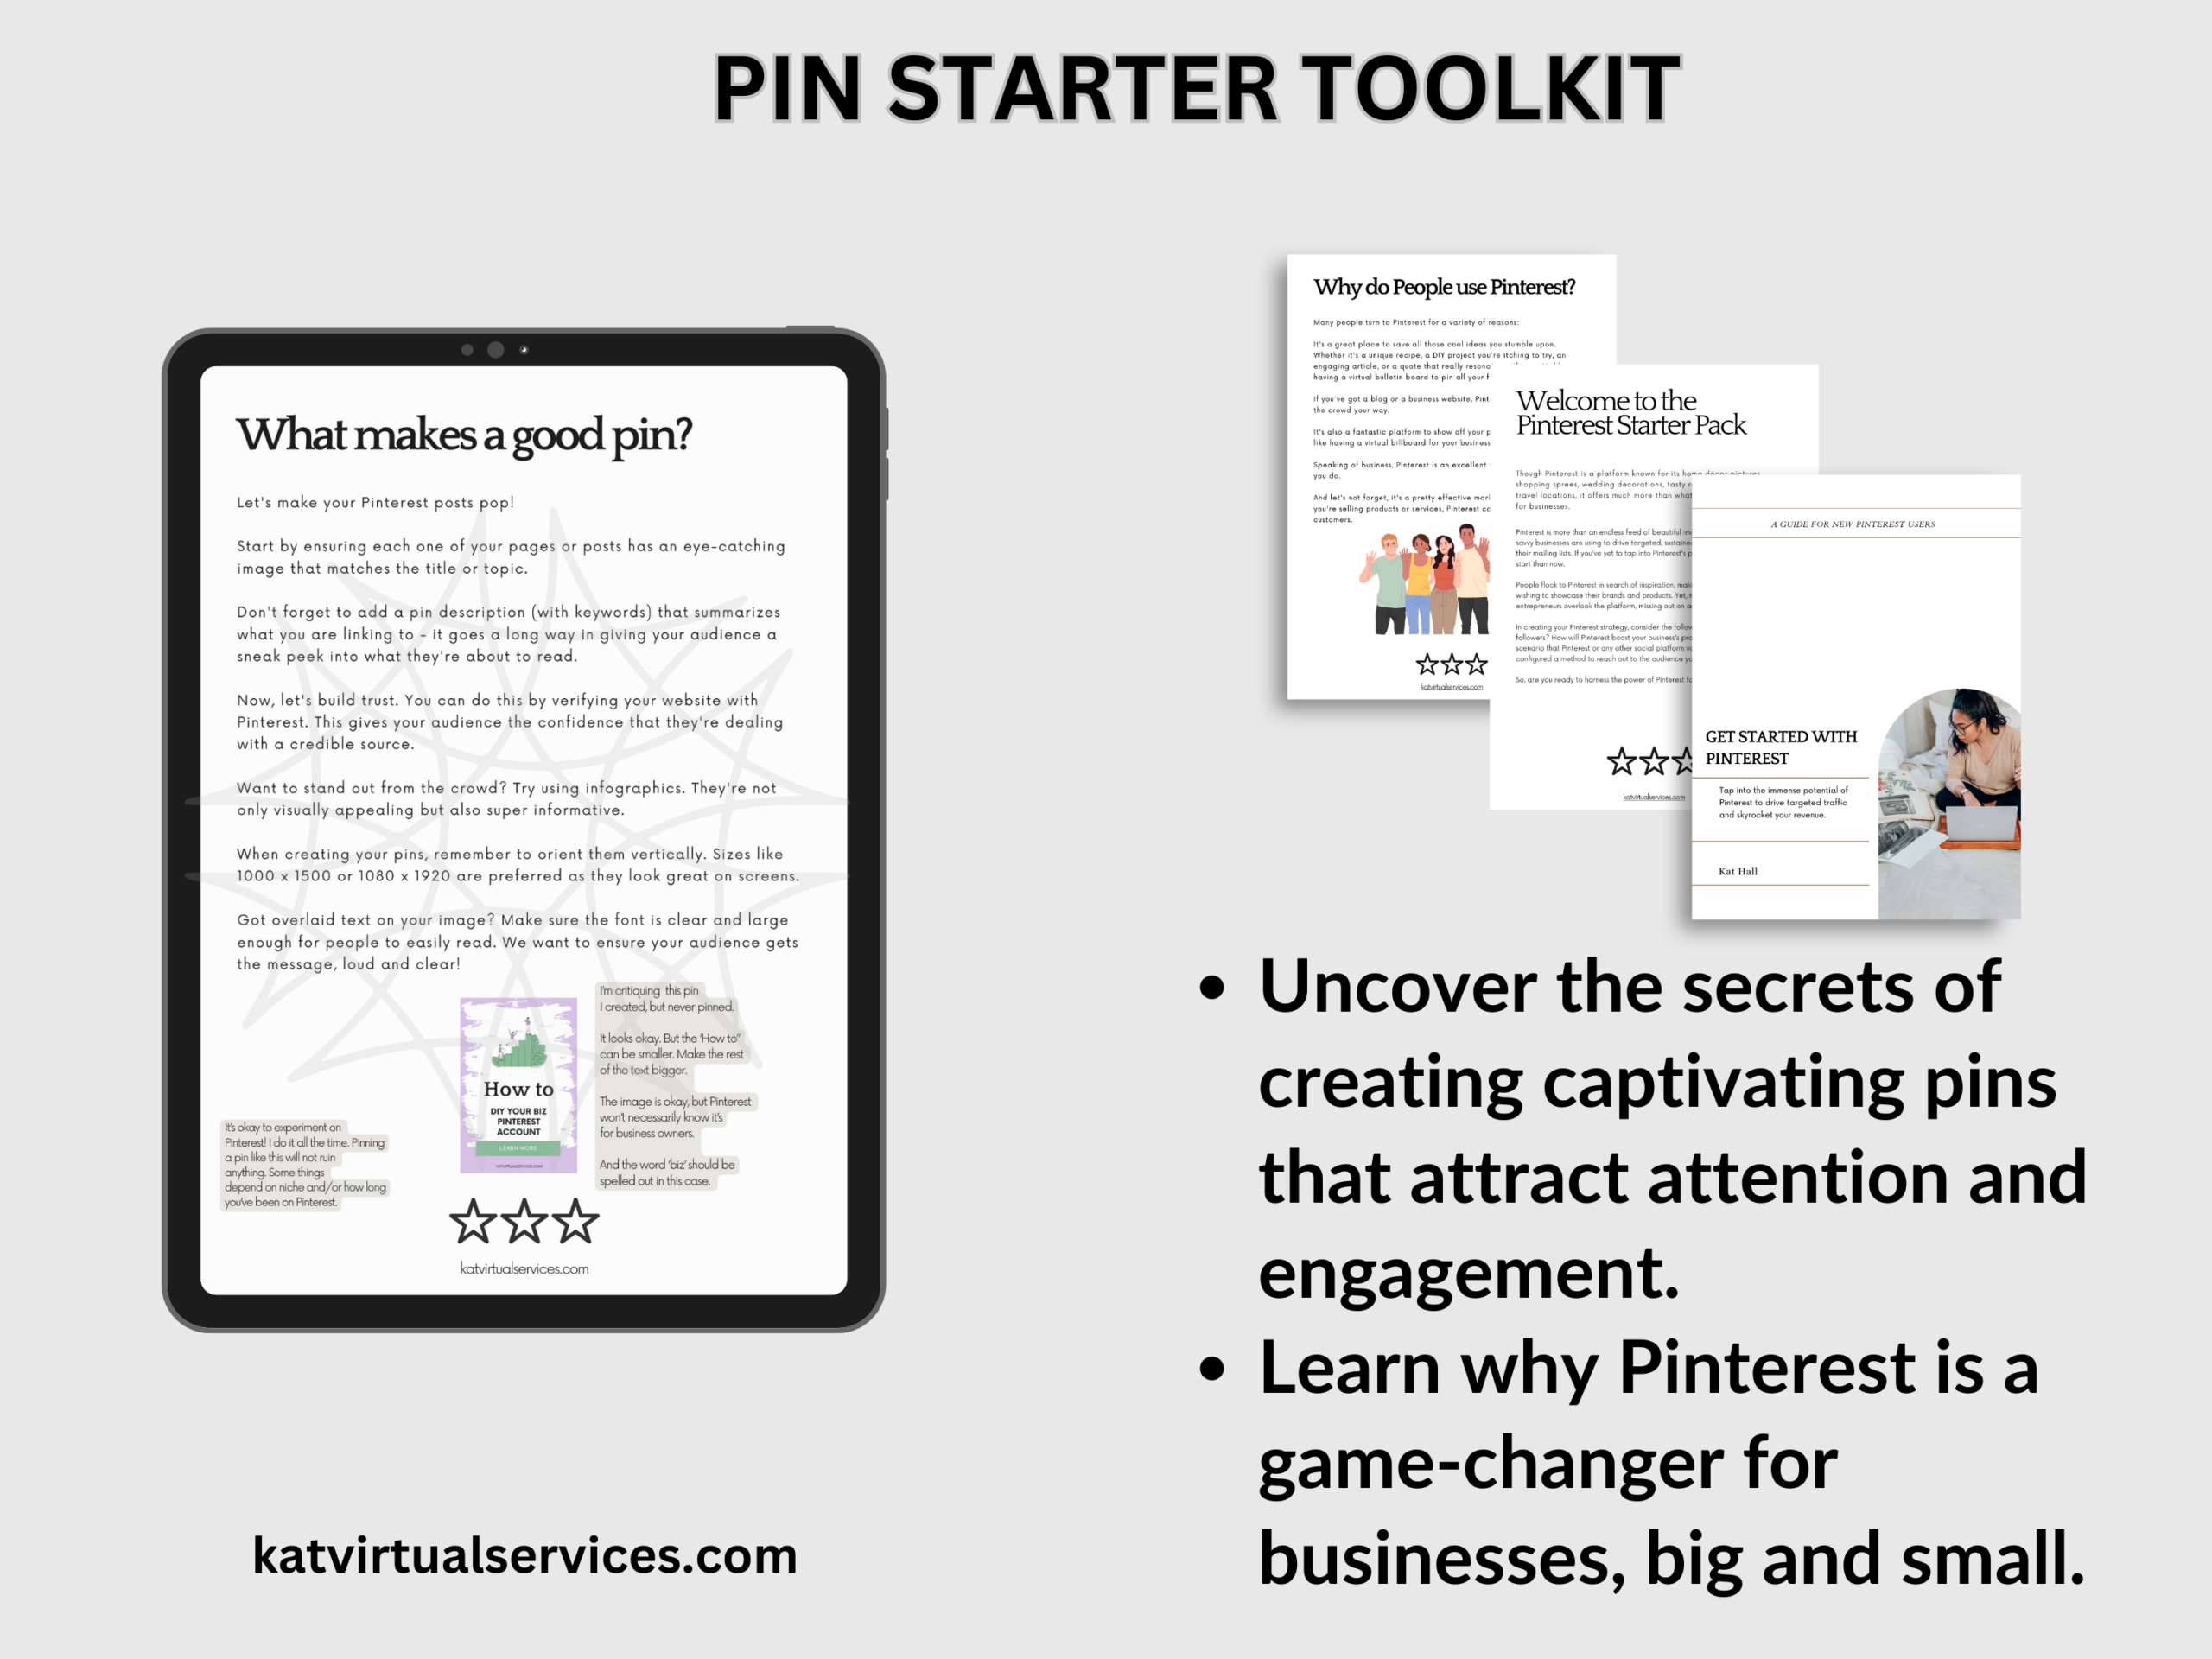 PIN STARTER TOOLKIT Uncover the secrets of creating captivating pins that attract attention and engagement.
Learn why Pinterest is a game-changer for businesses, big and small.